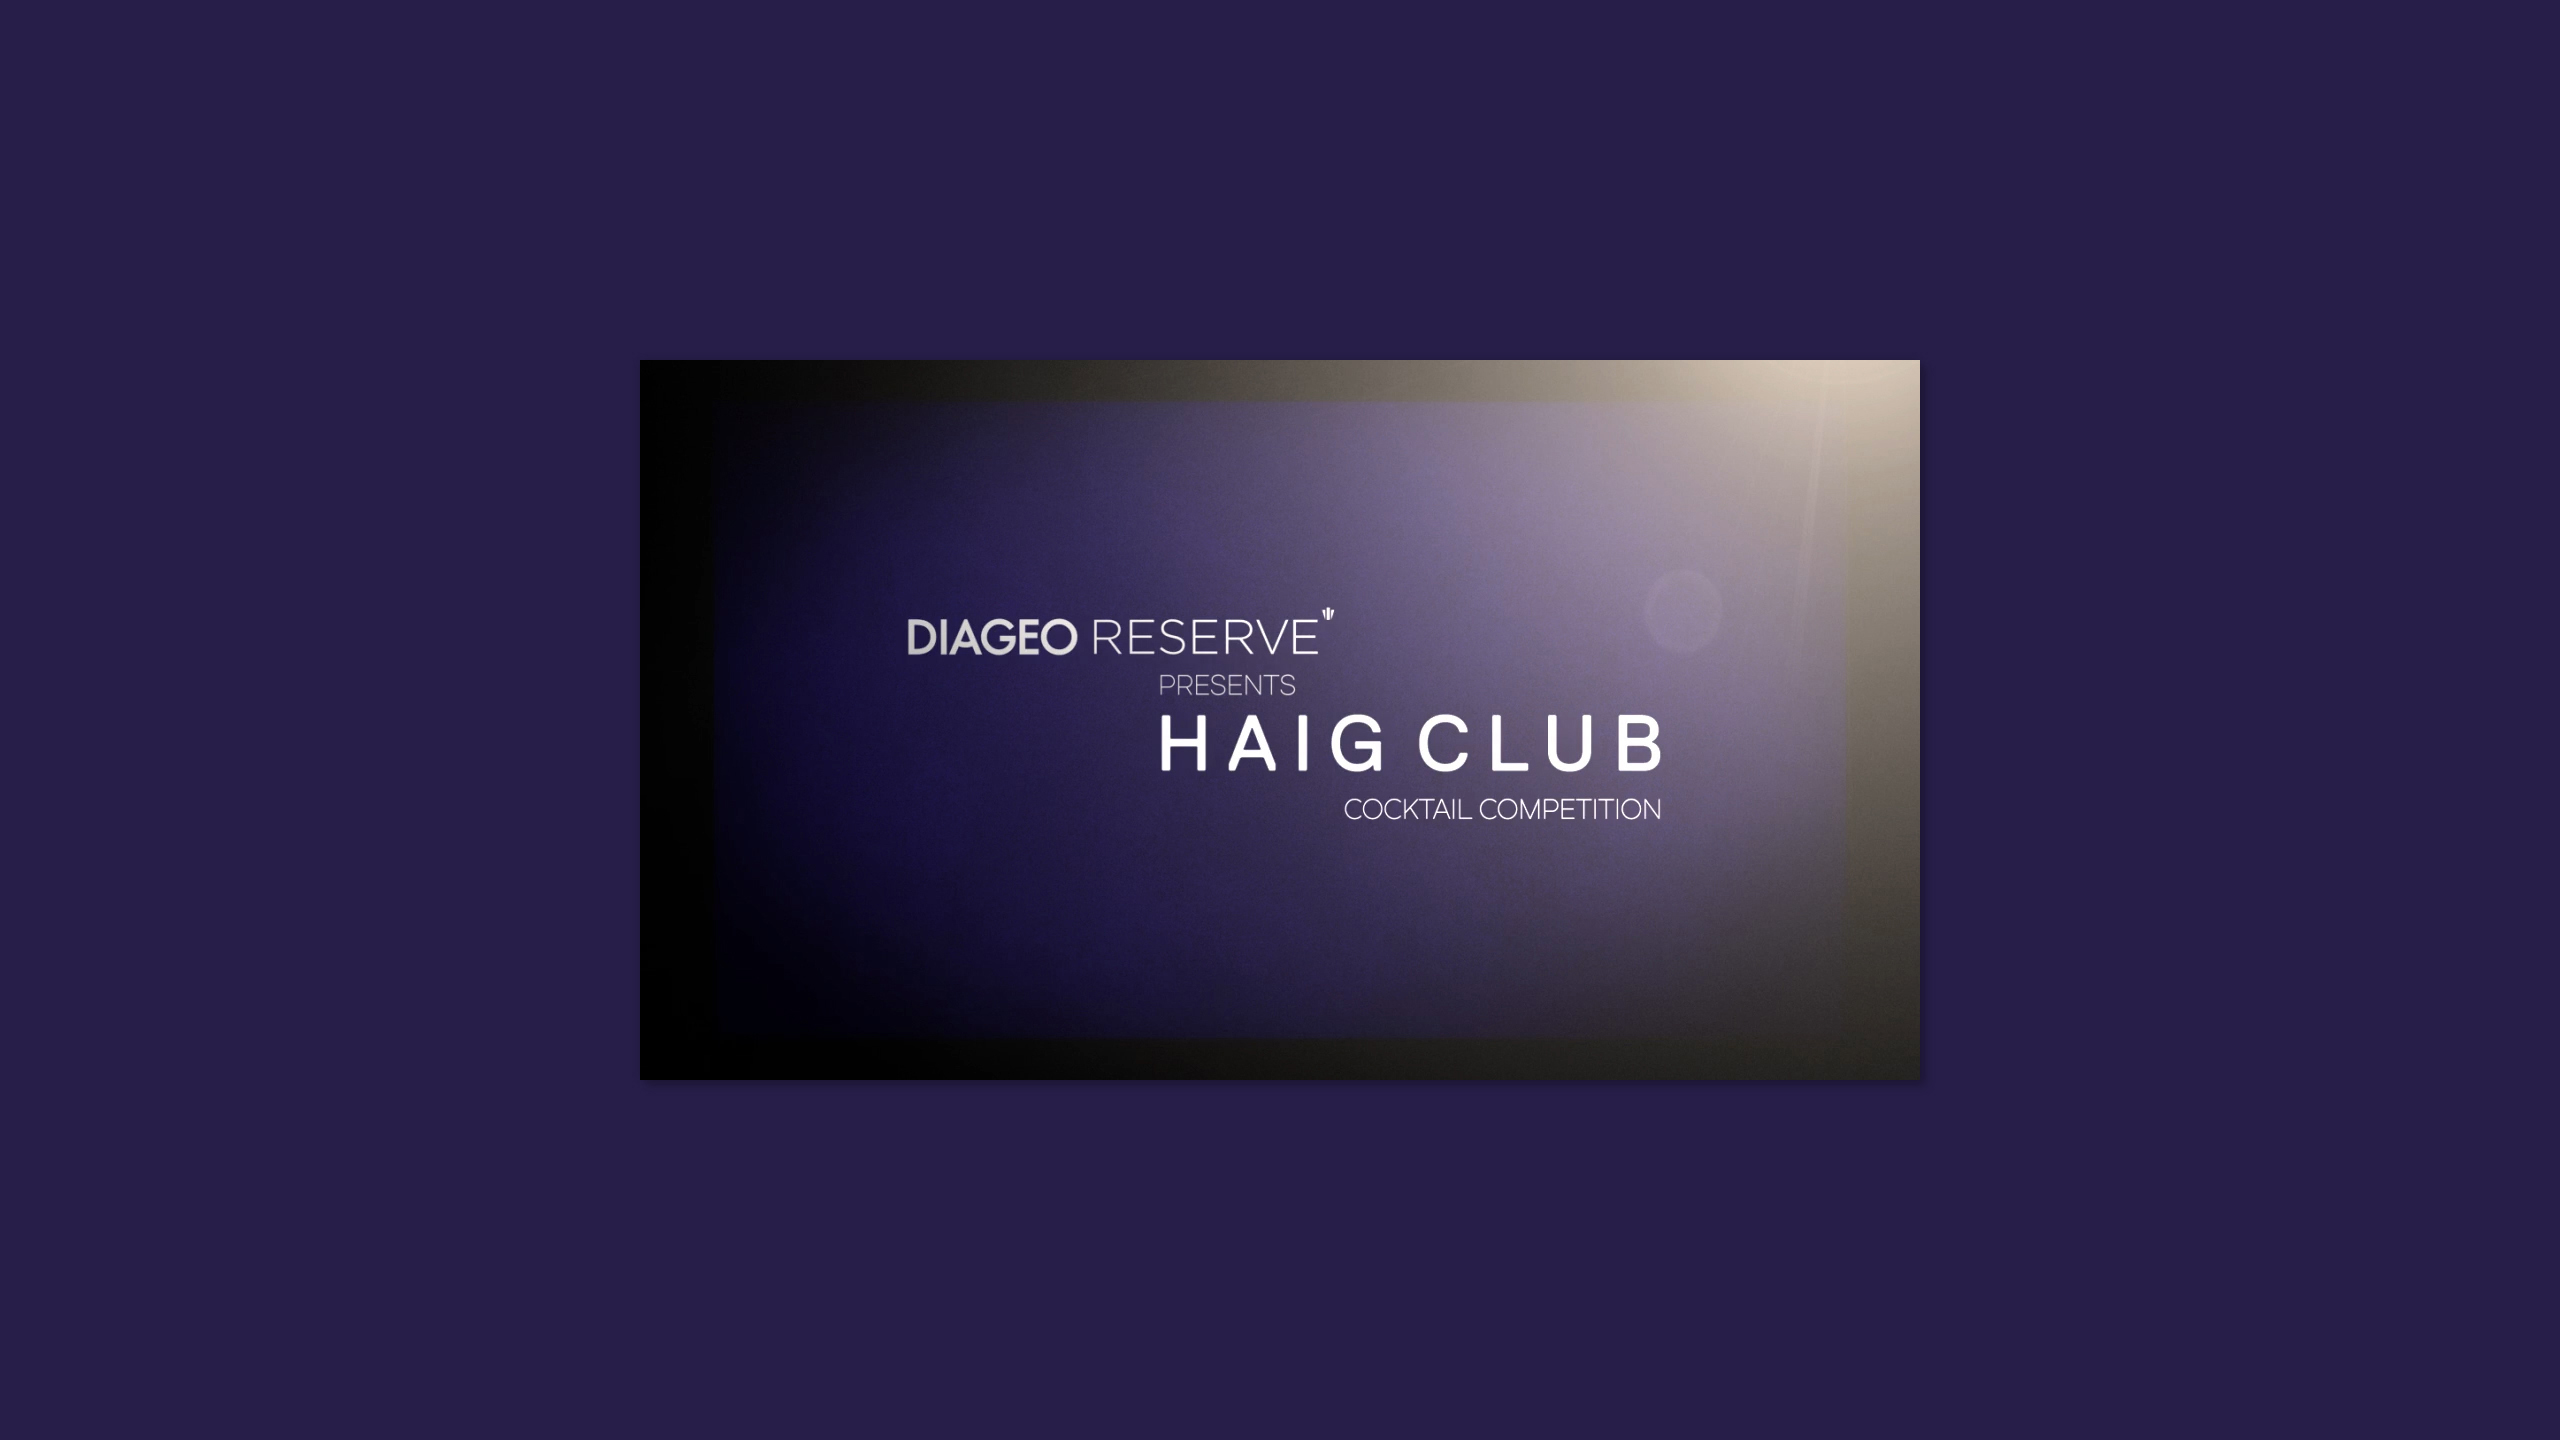 Haig Club Cocktail competition motion design by Dephined